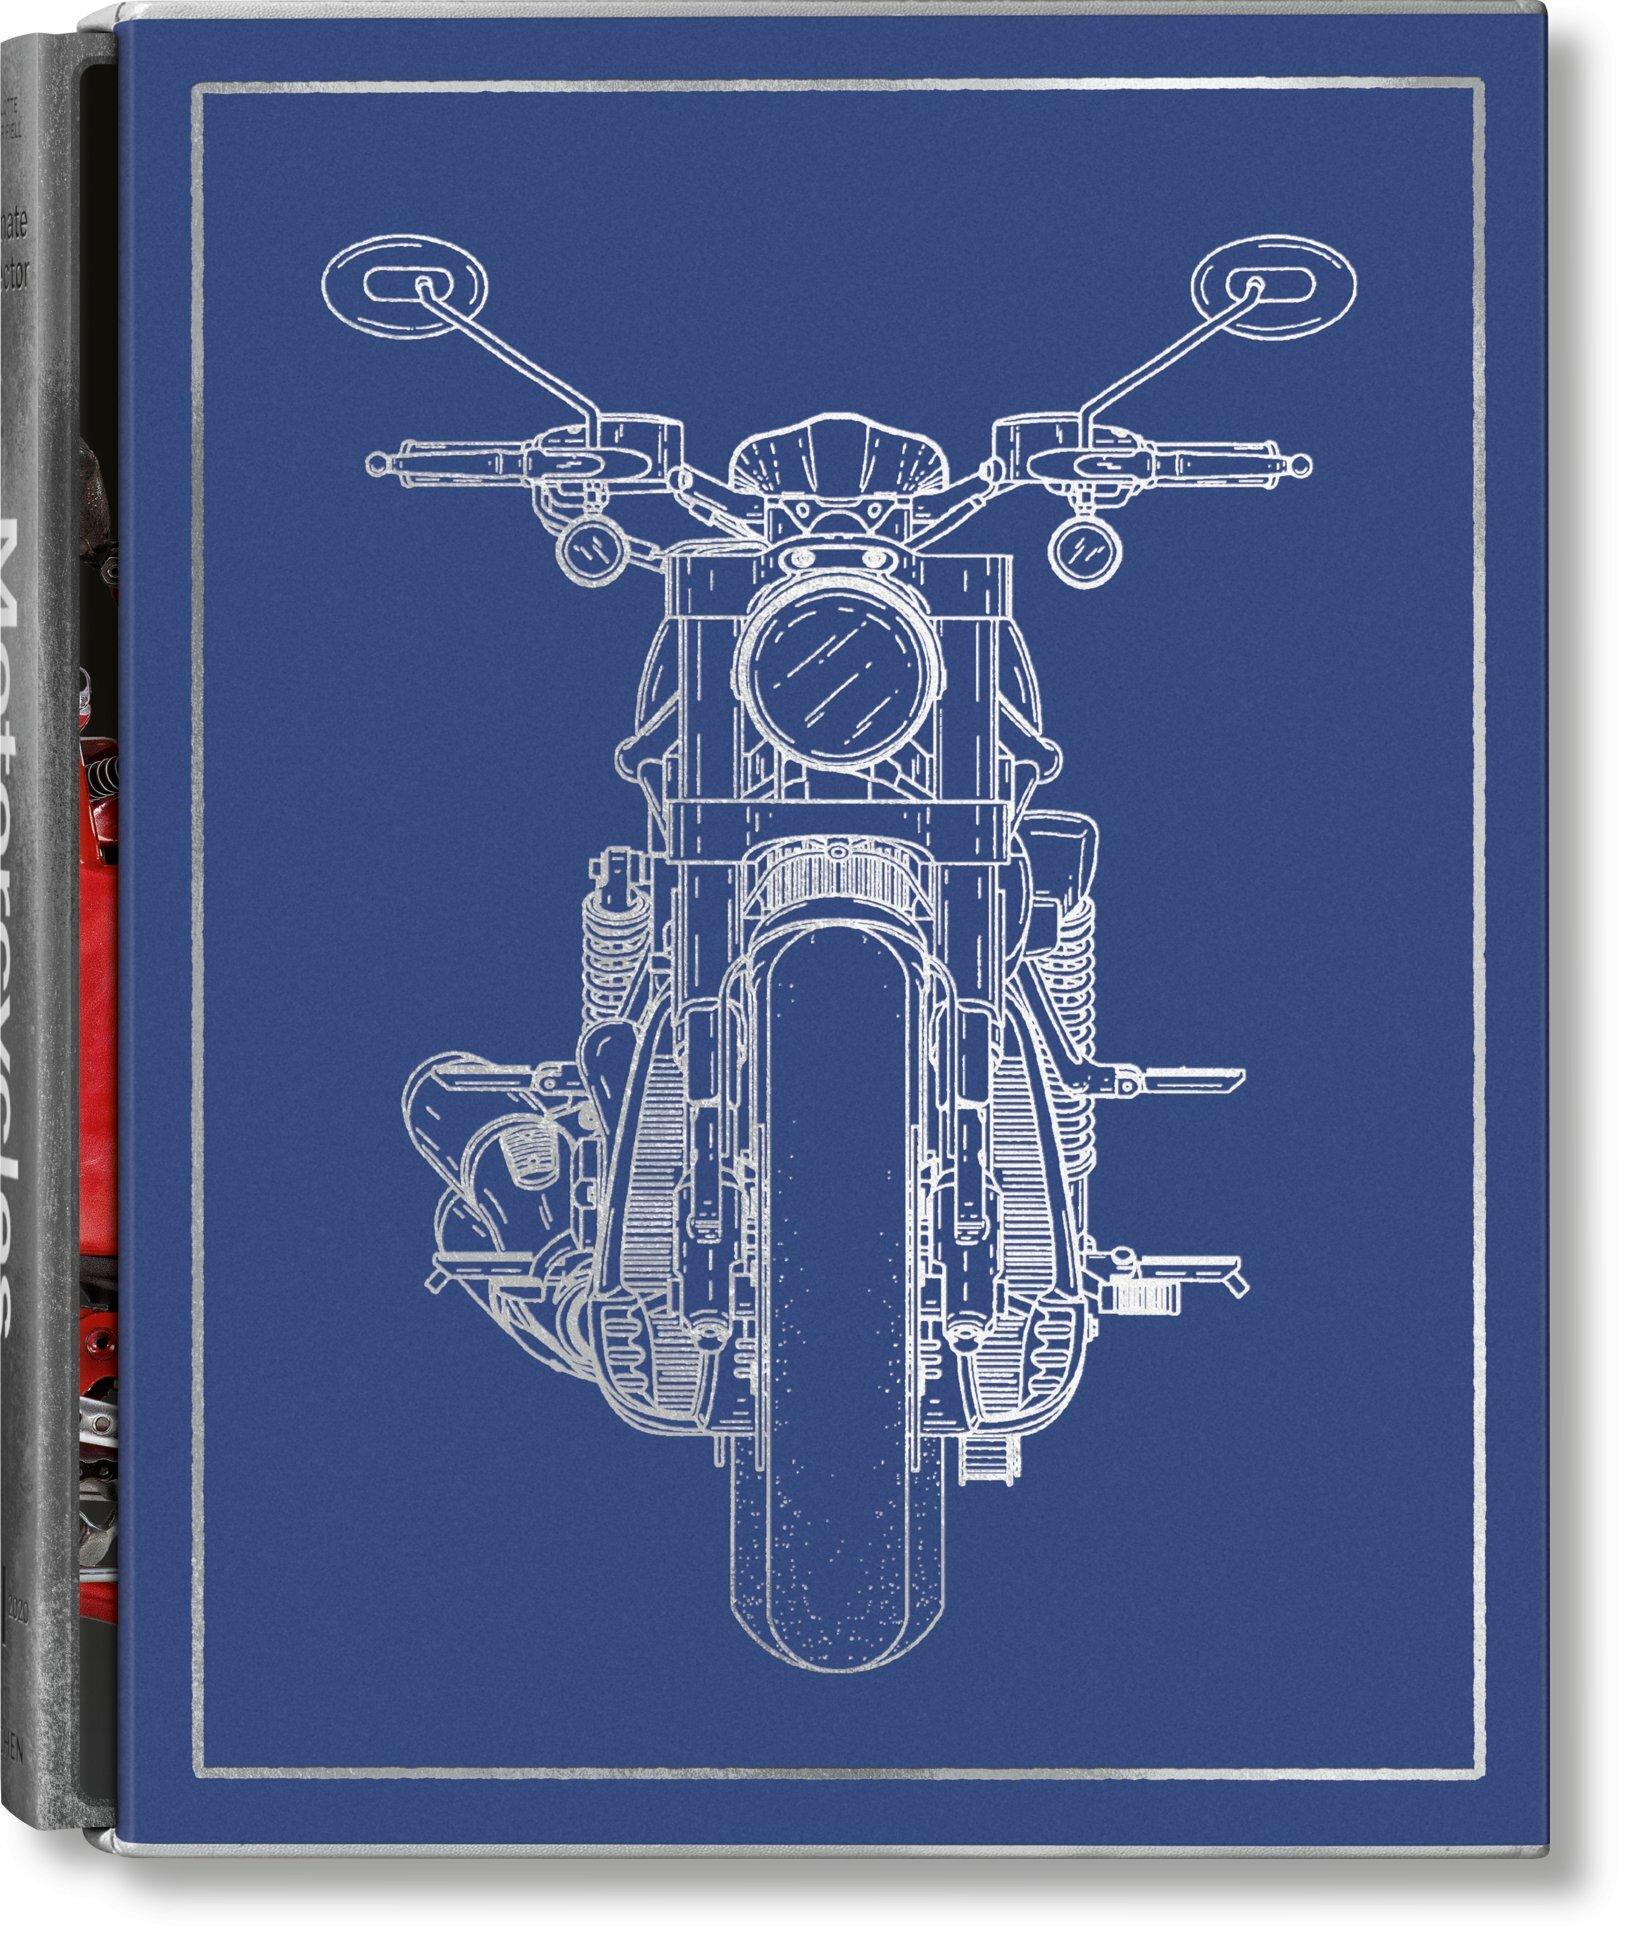 100 of the most legendary and coveted motorcycles of all time

Dream Rides: The most spectacular bikes on the planet. From the 1894 Hildebrand & Wolfmüller to the 2020 Aston Martin AMB 001, this book lavishly explores 100 of the most desirable